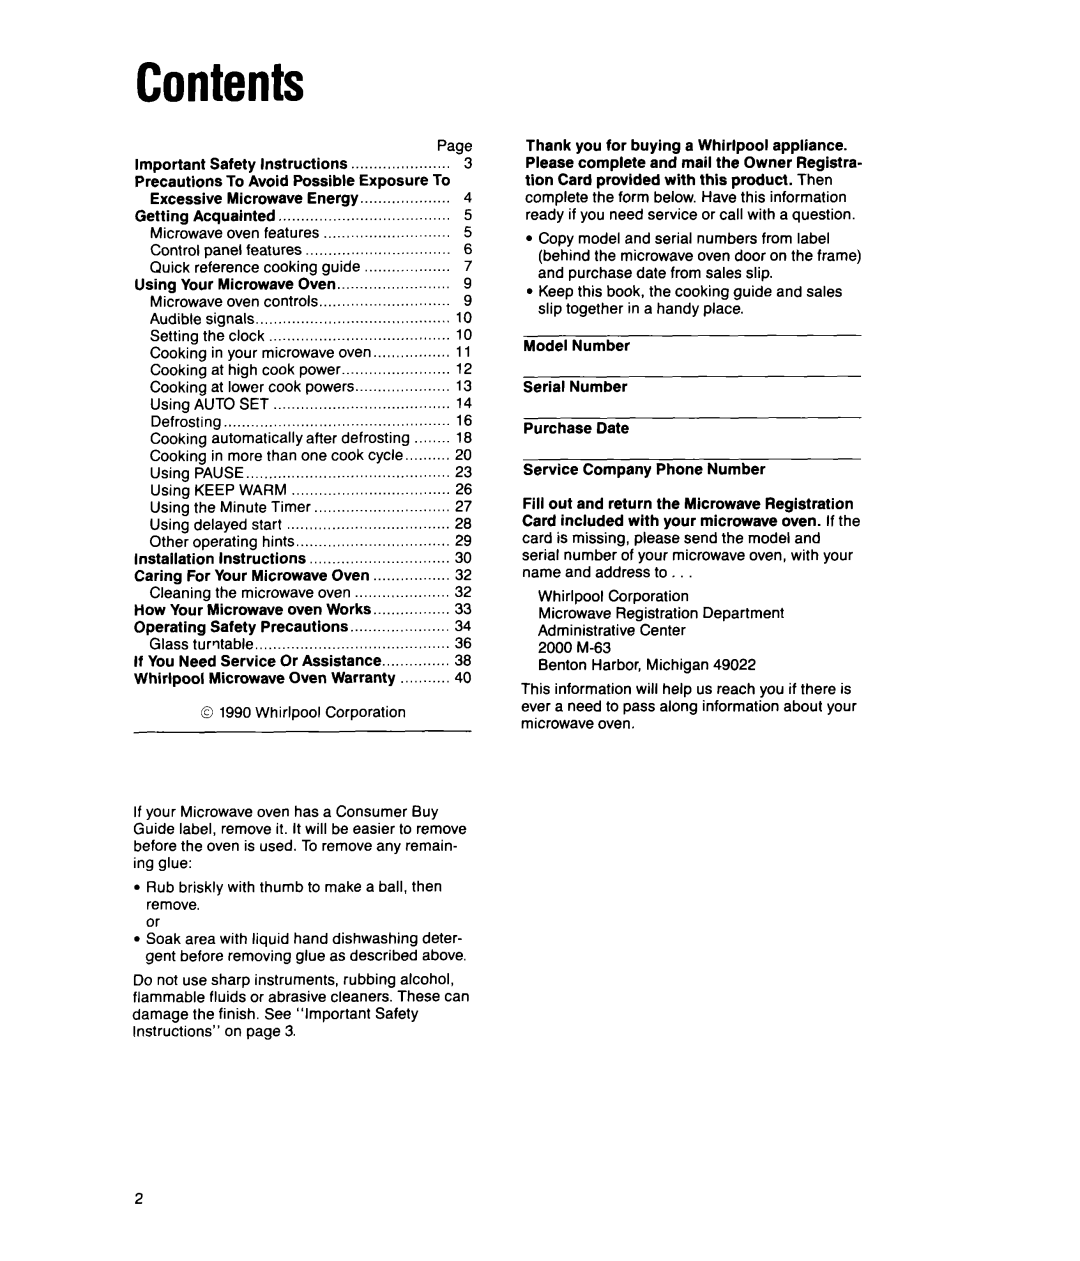 Whirlpool MT2150XW manual Contents 